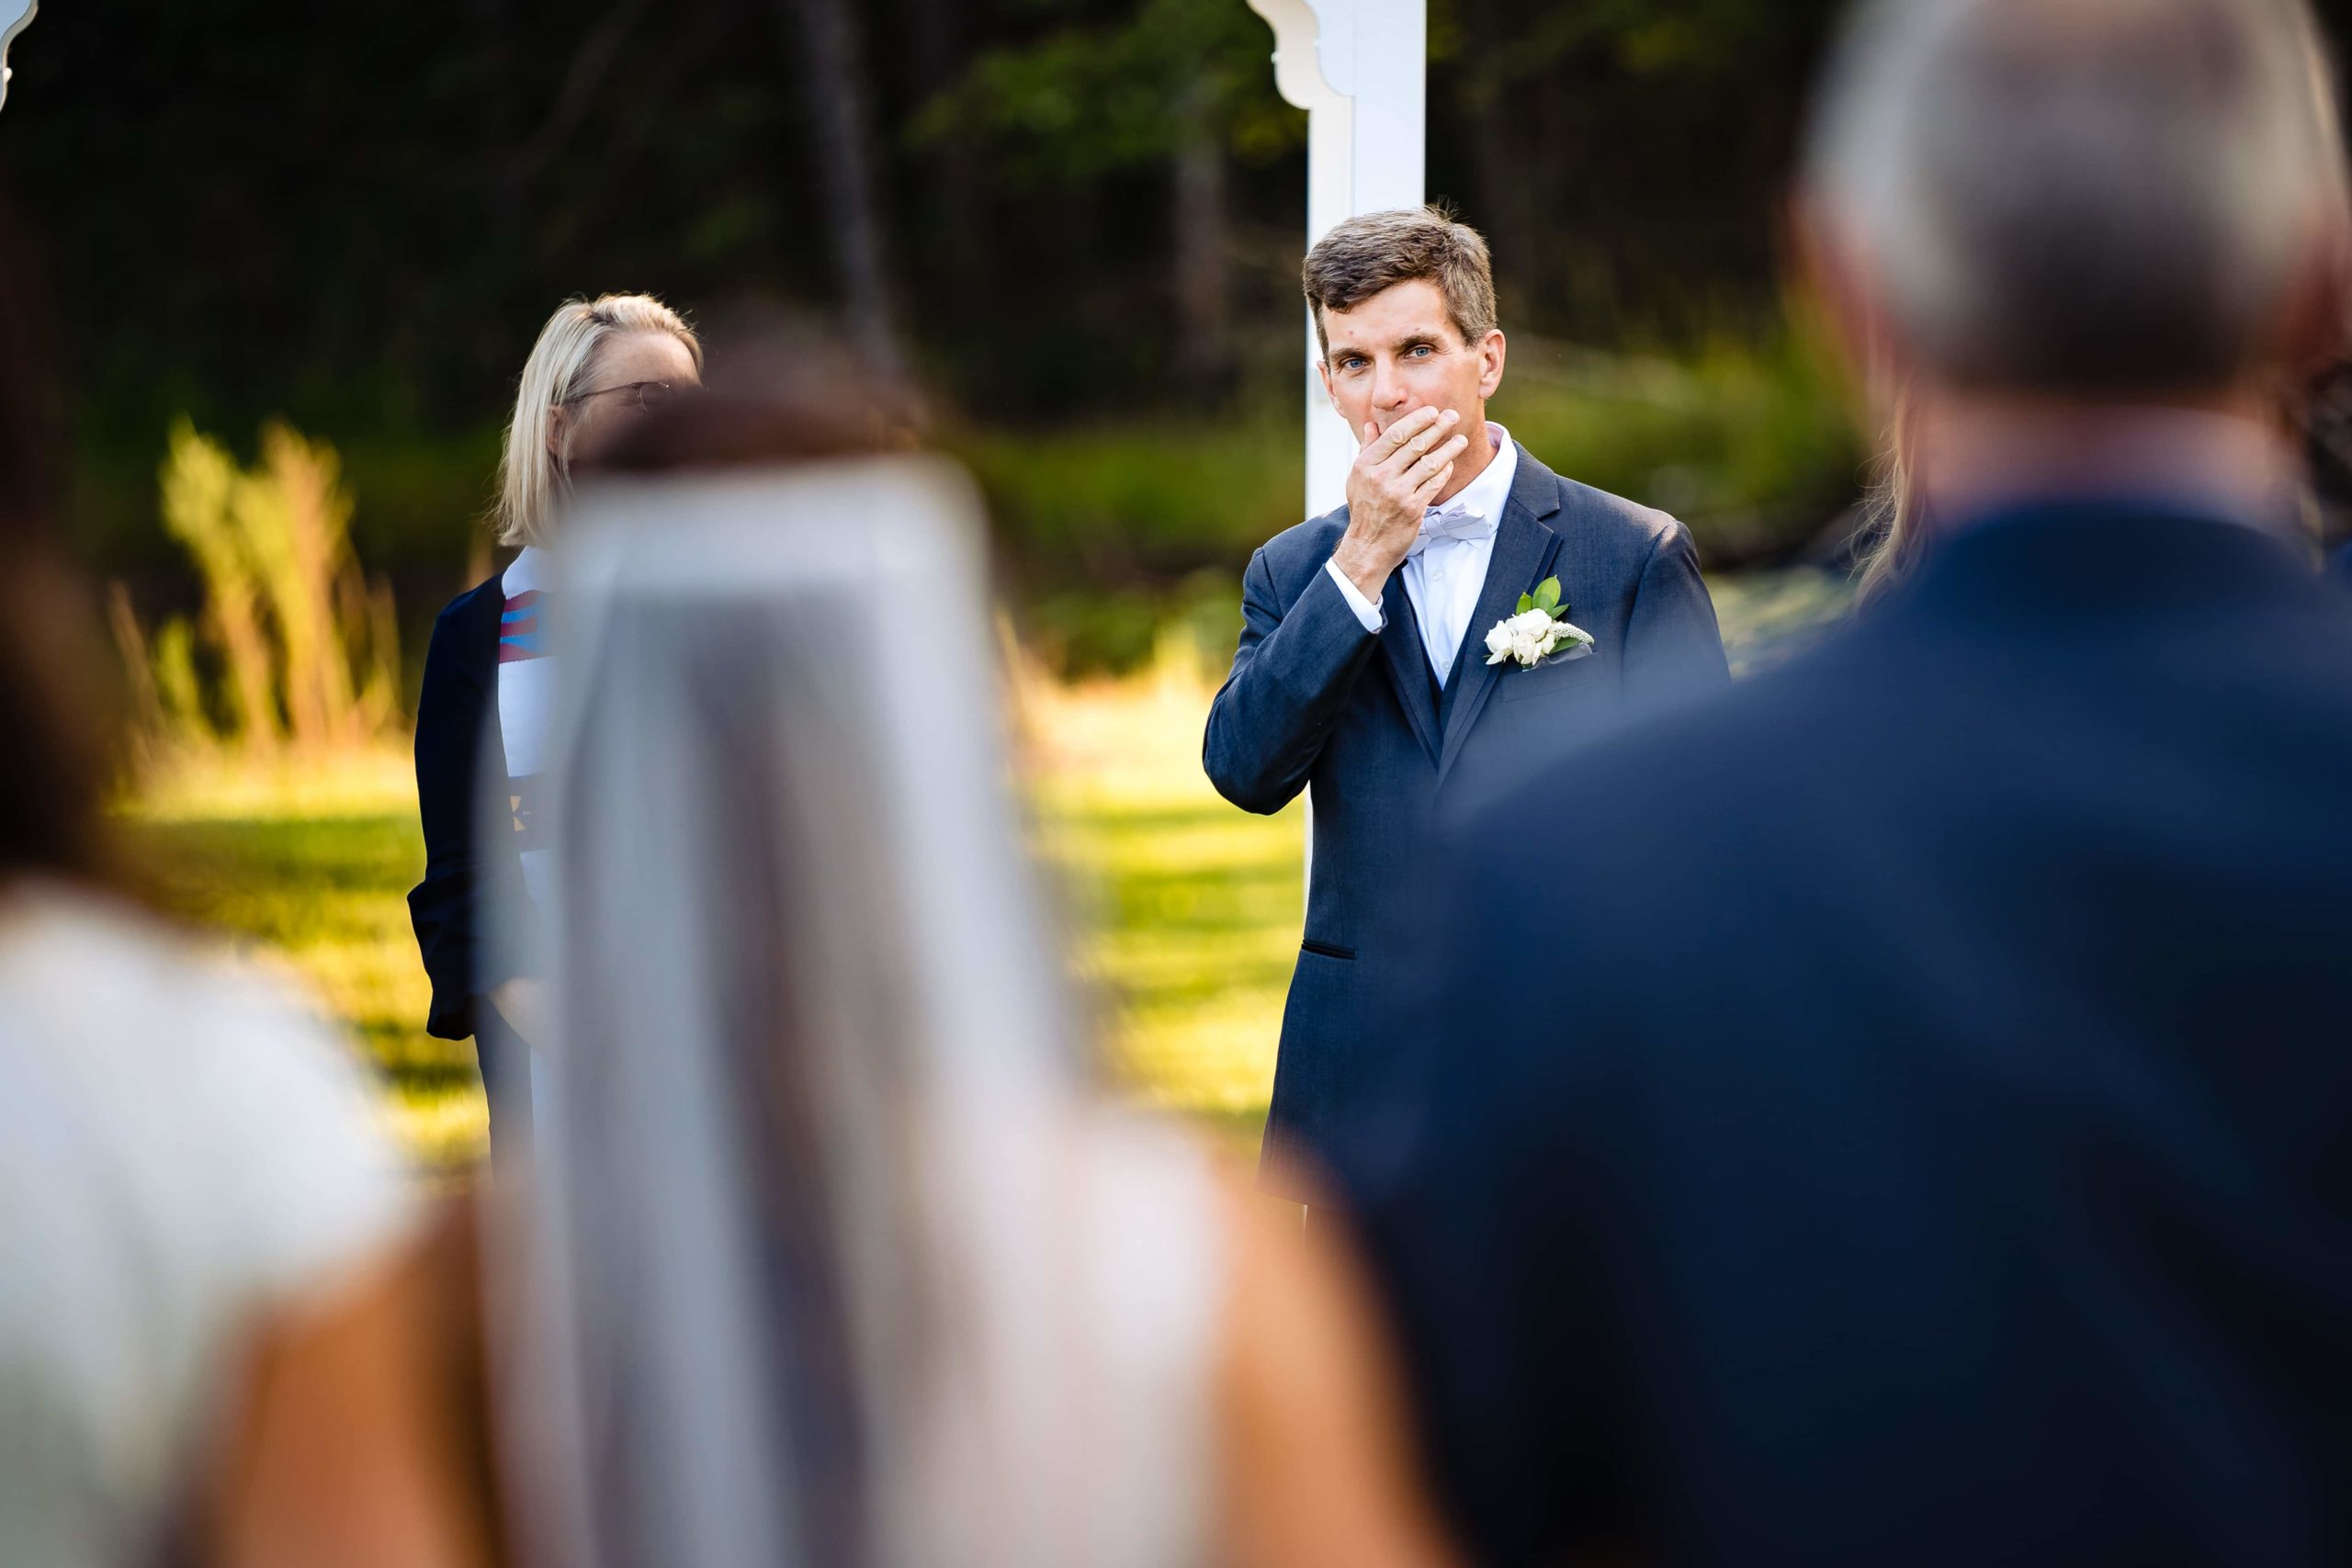 If you have two photographers at your wedding, you can get both angles of the first look and the walk down the aisle - here, one photographer has captured the groom's reaction as the bride walks down the aisle. The other photographer photographed the bride walking in